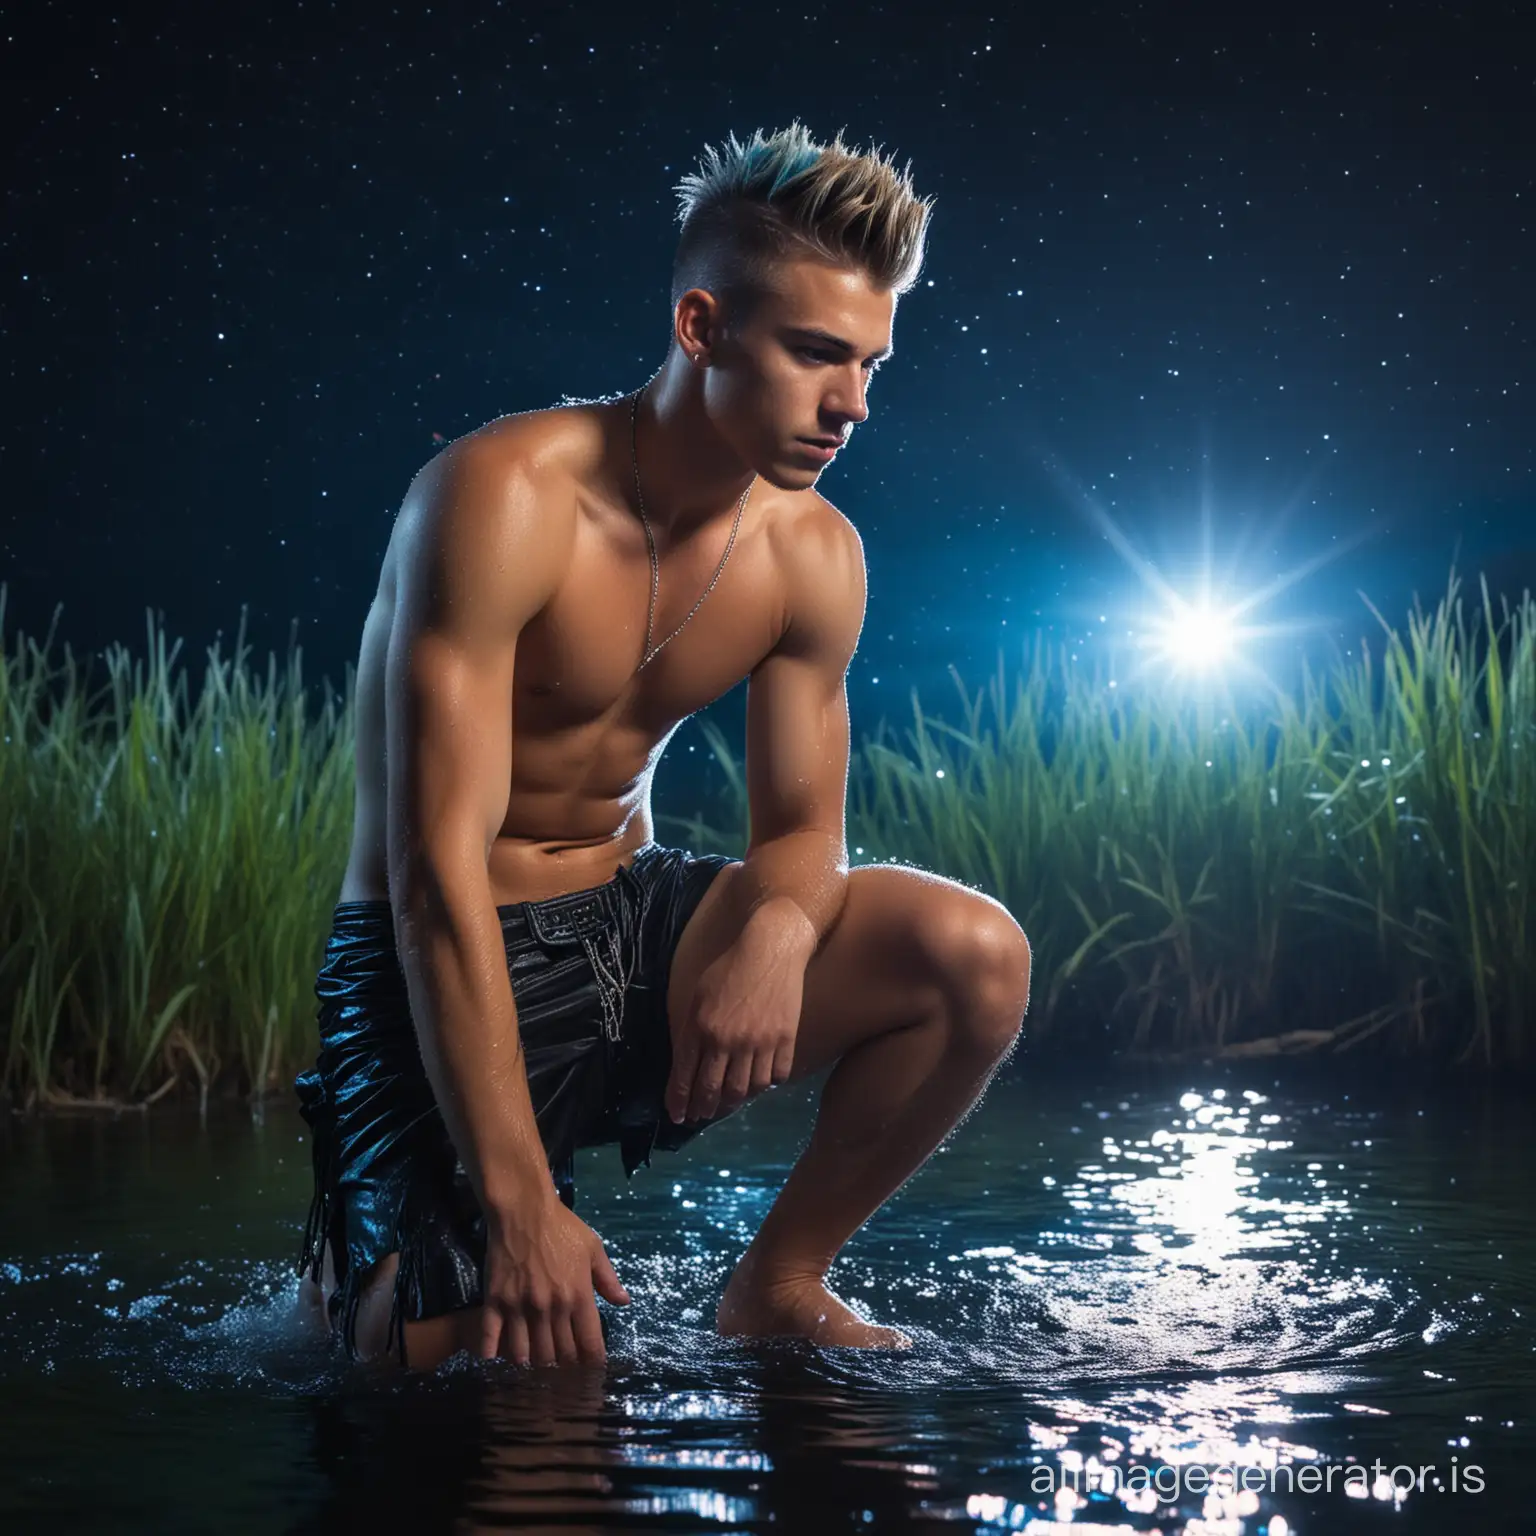 Sexy young sweaty teenage shirtless muscular male in loincloth, crouching in water in a natural oasis by night. Blue neon colors ambient. The sky is full of stars. Teasing. Mohawk hairdress. The clothes must be black.